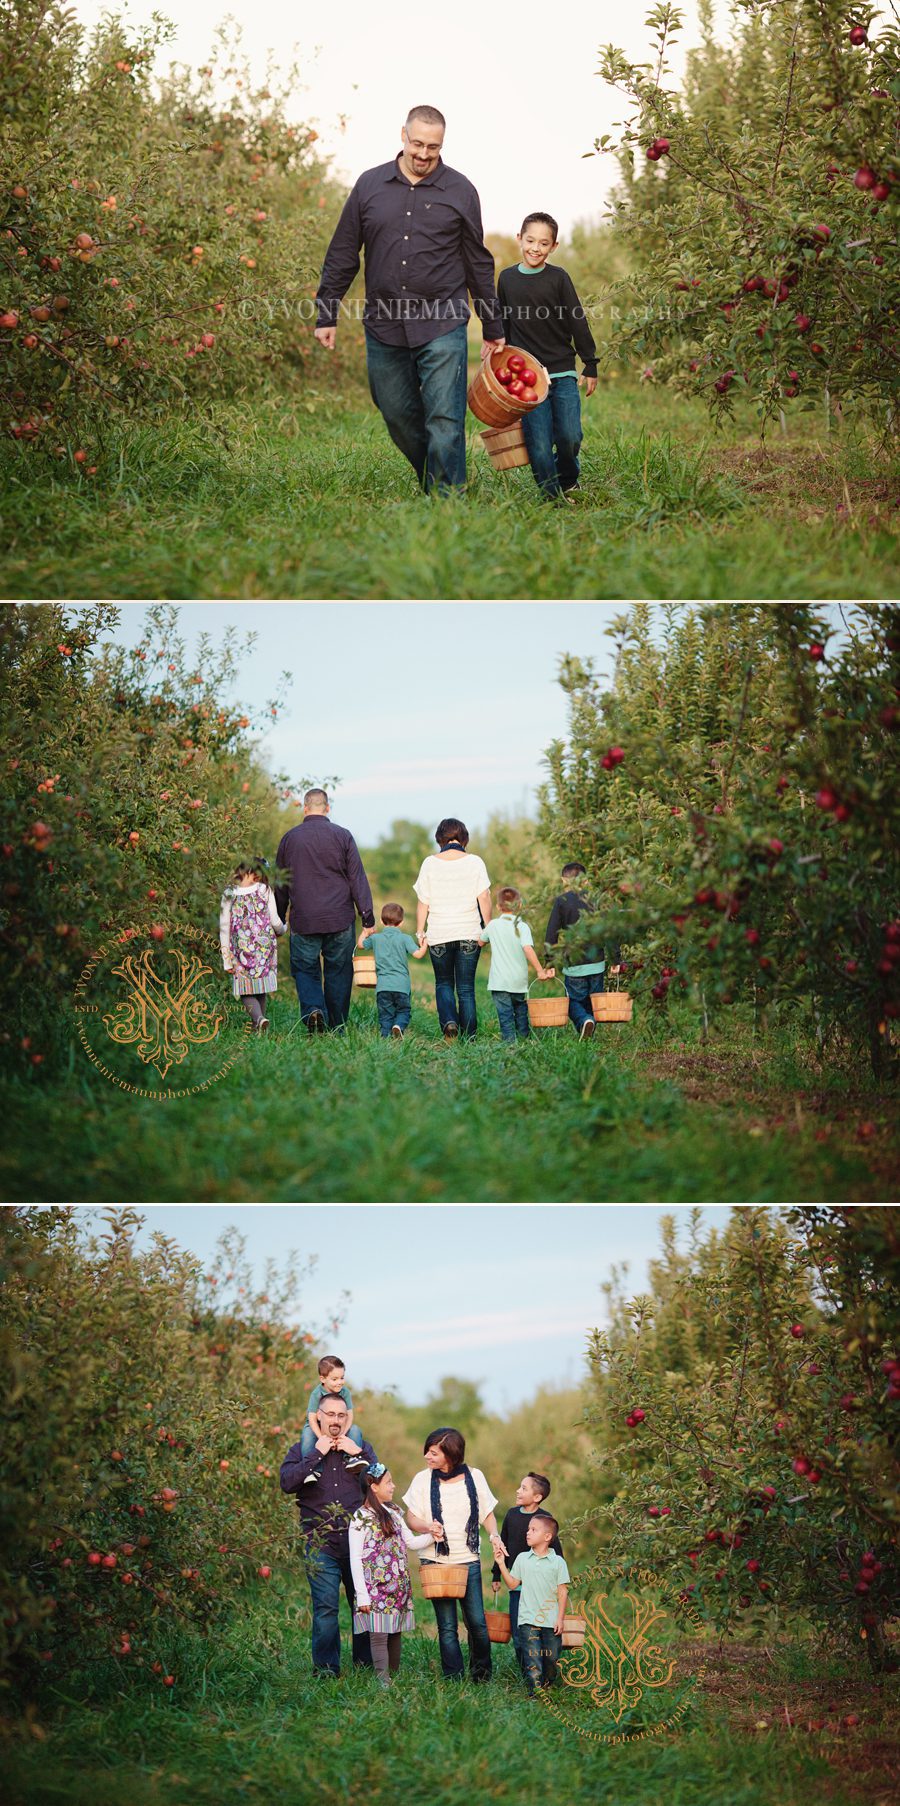 Photos of family in the fall at apple orchard captured by Yvonne Niemann Photography.